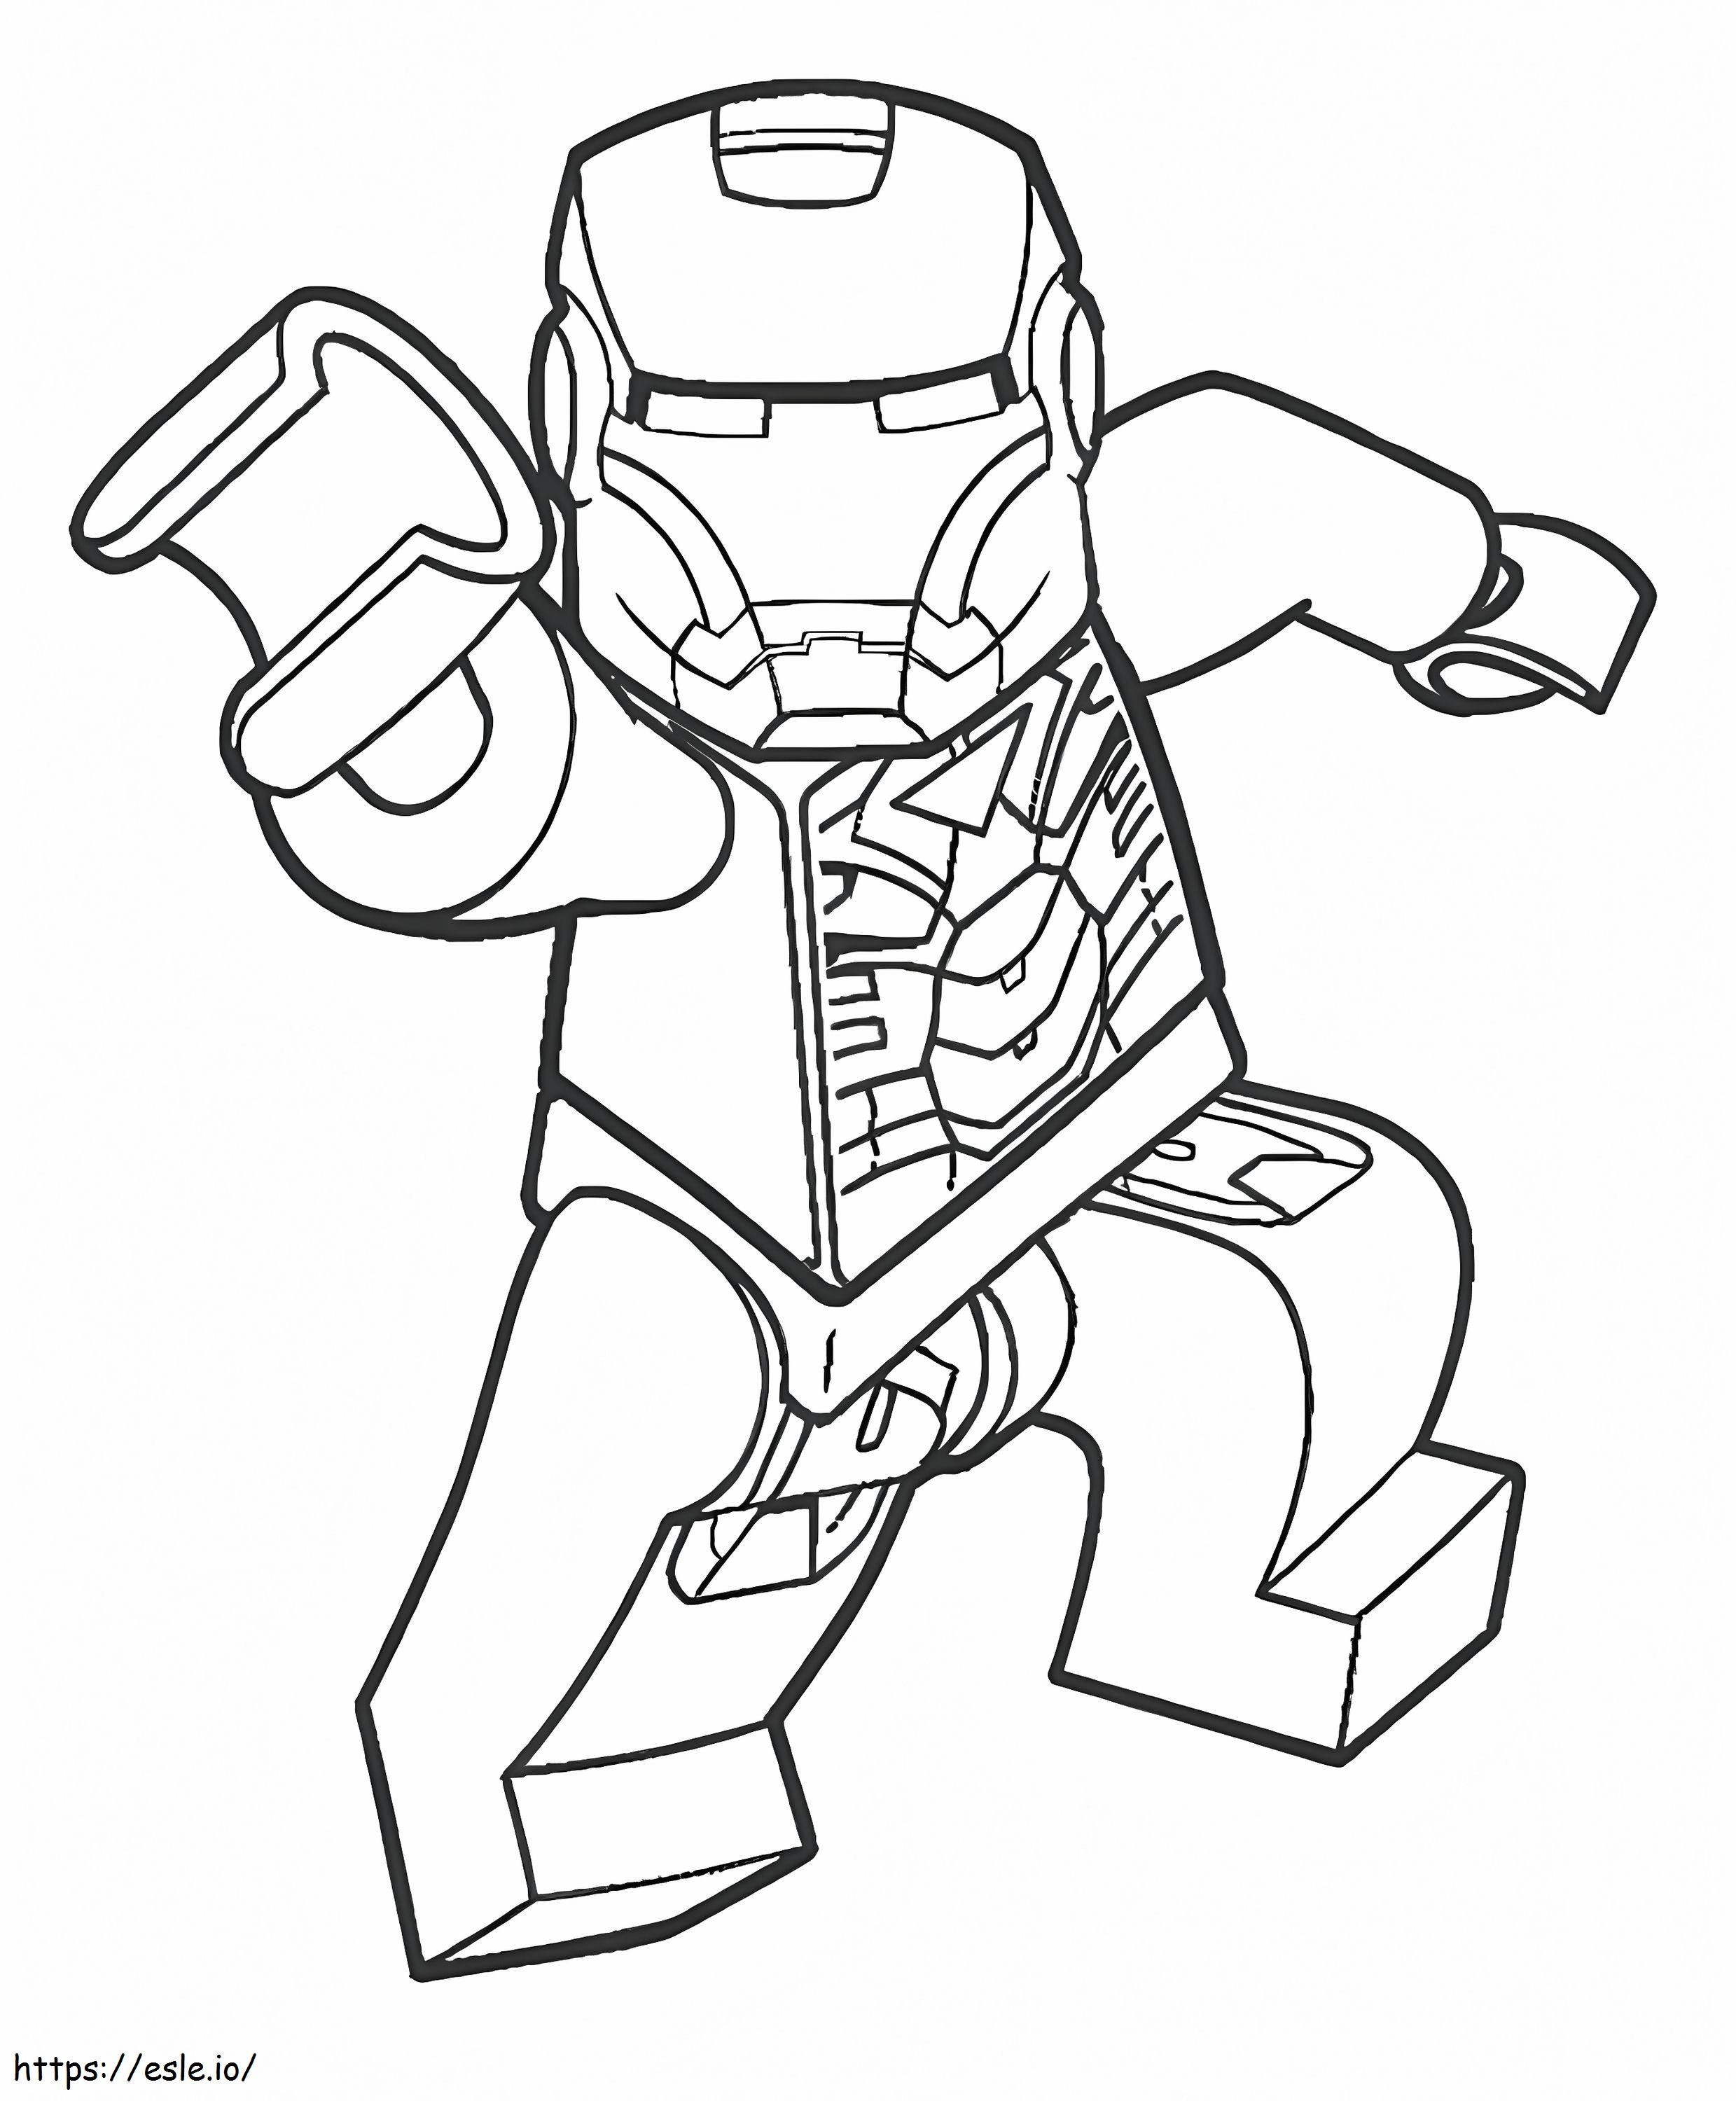 Lego Iron Man 1 coloring page